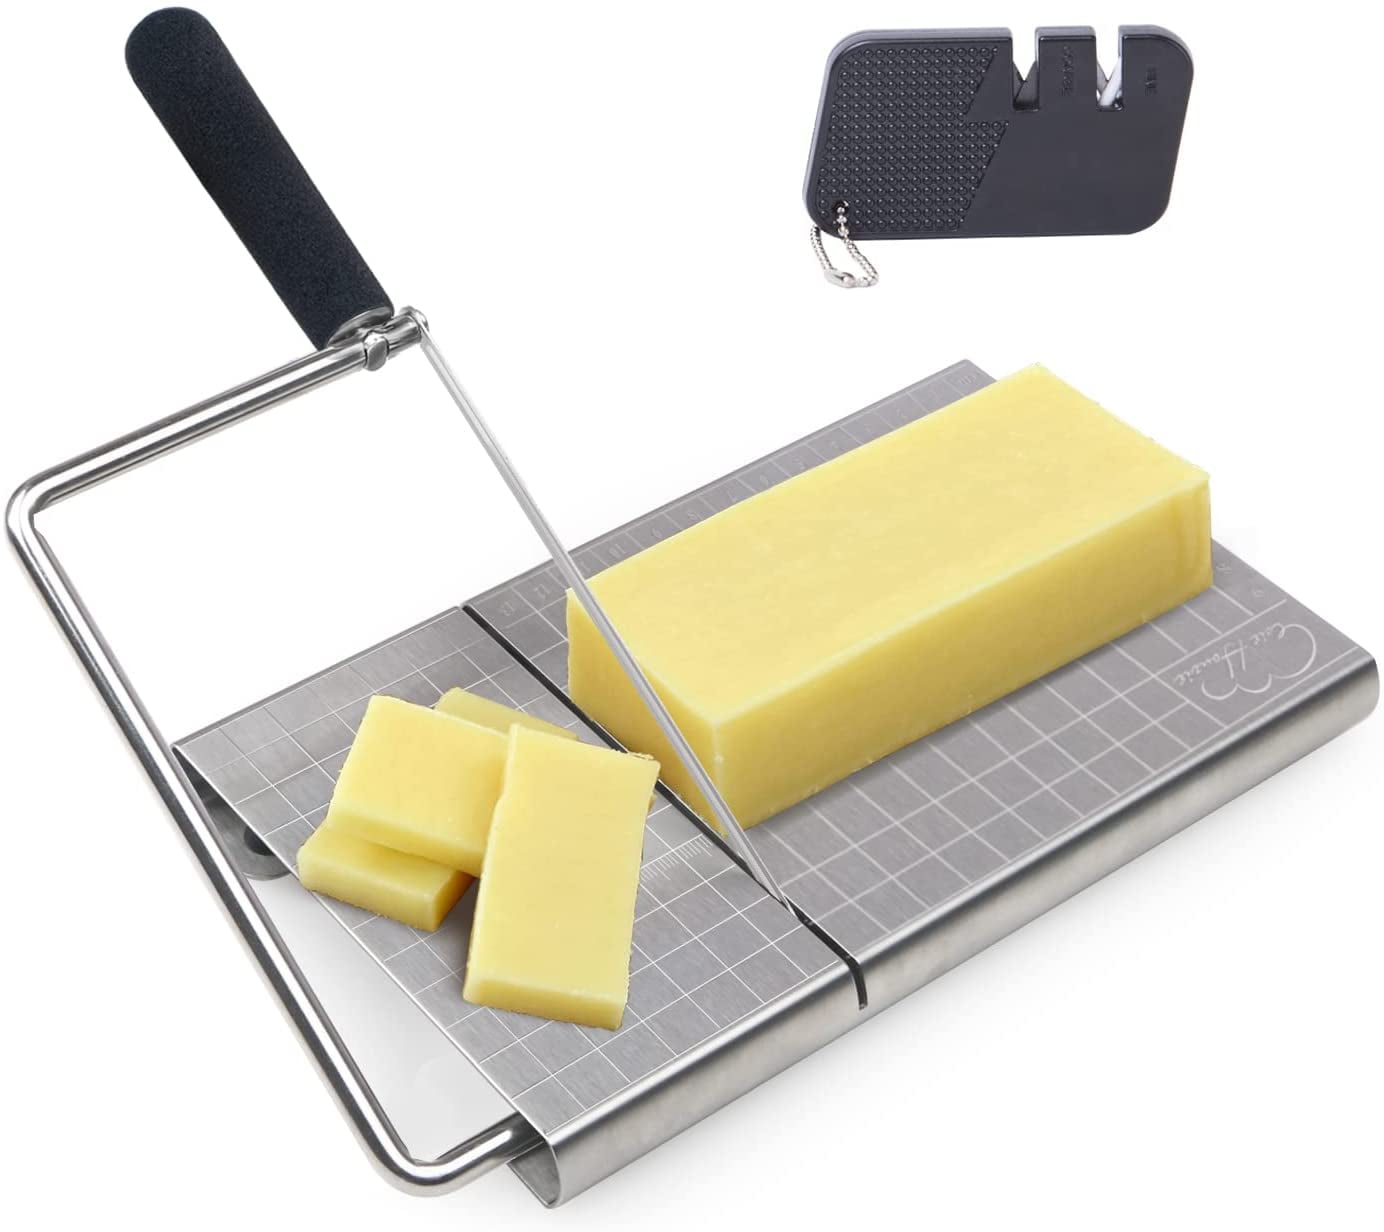 Silver Stainless Steel Cheese Grater Heavy Duty Plane Cheese Slicer  Non-Stick Cheese Cutter Butter Knife Kitchen Cooking Tools